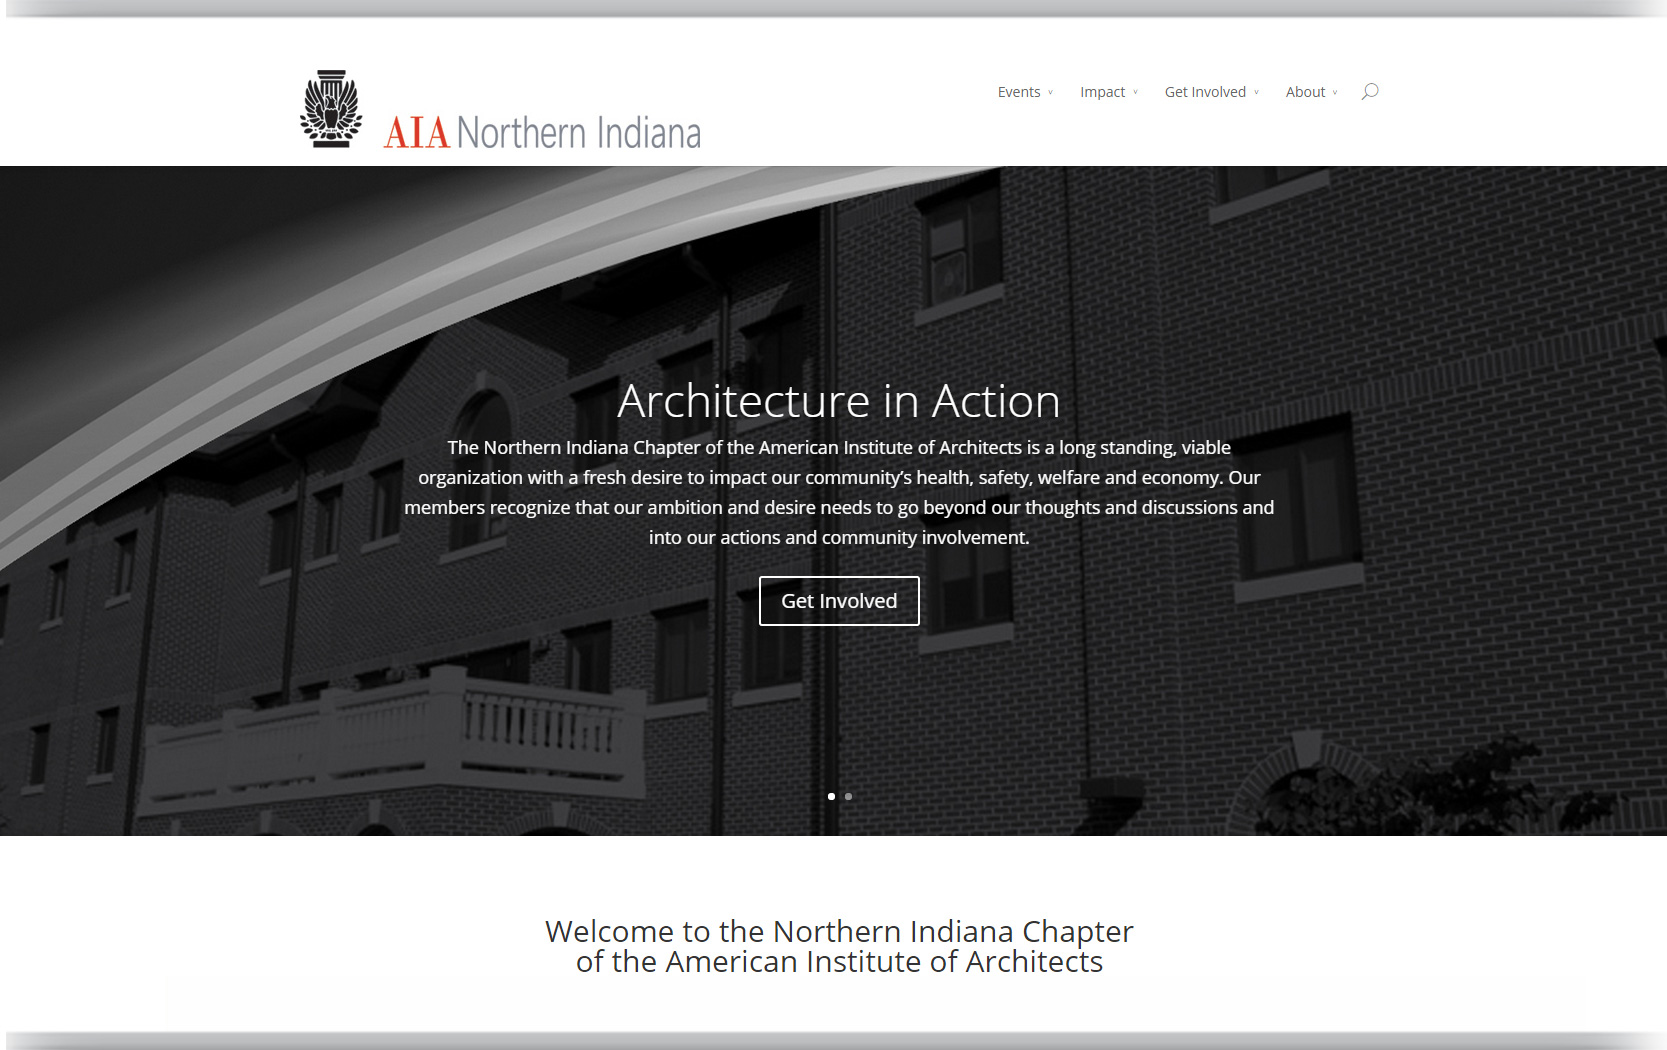 AIA Northern Indiana Architecture in Action Homepage